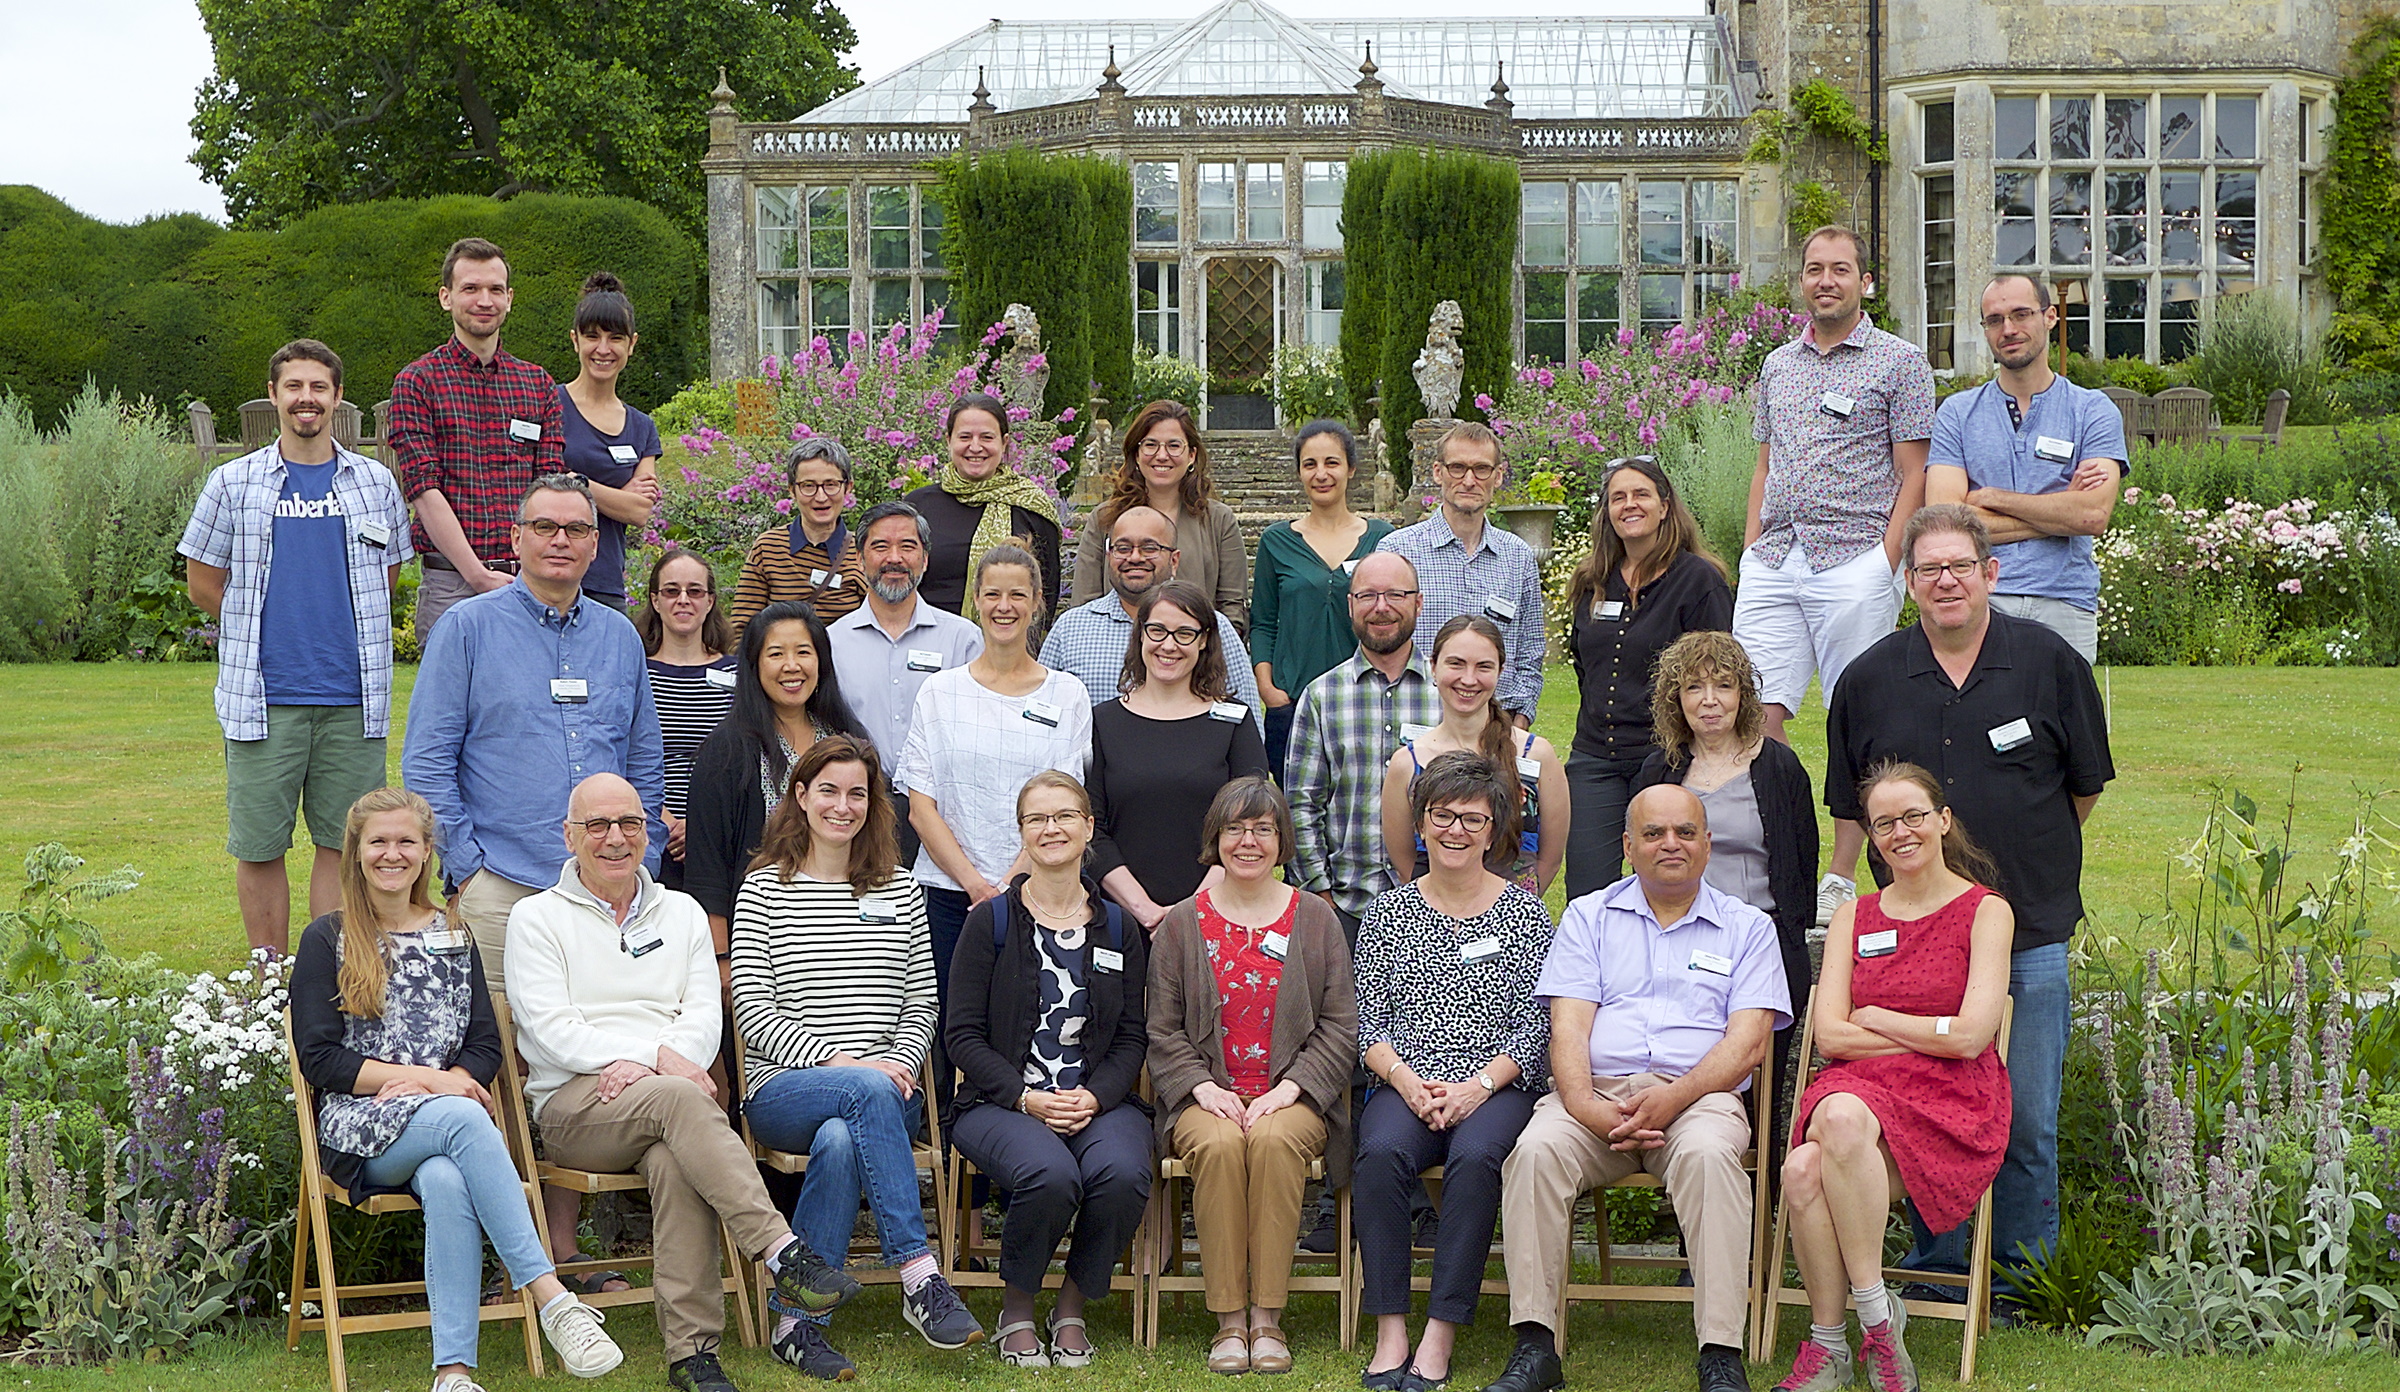 A large group of people posing for a photo in a garden